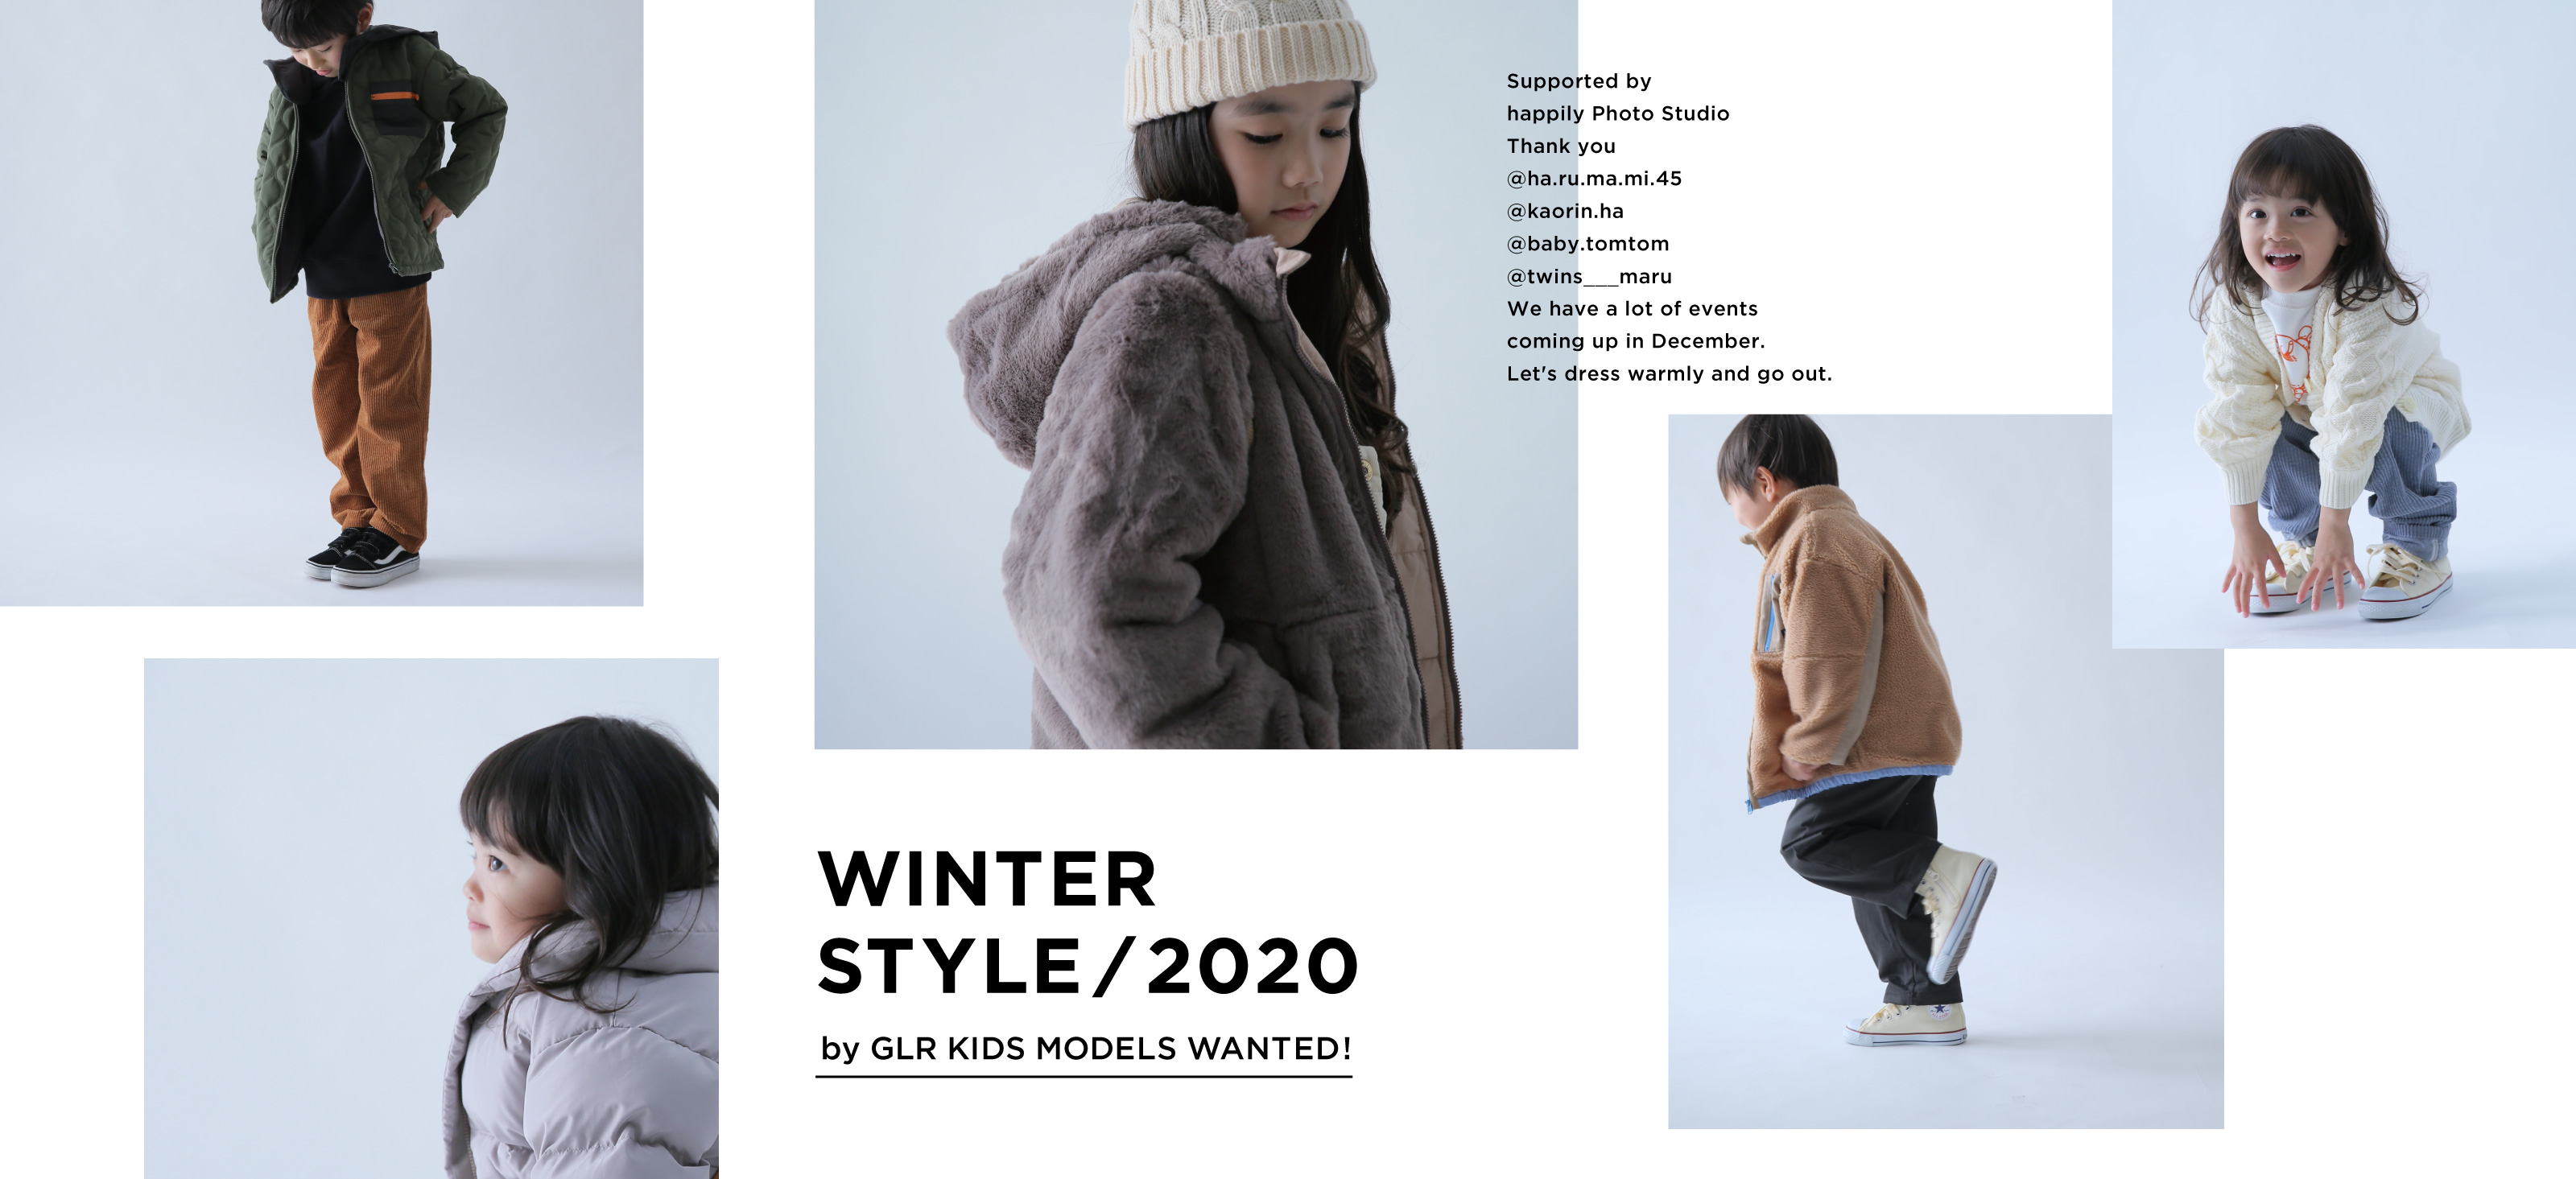 WINTER STYLE / 2020 by GLR KIDS MODELS WANTED!